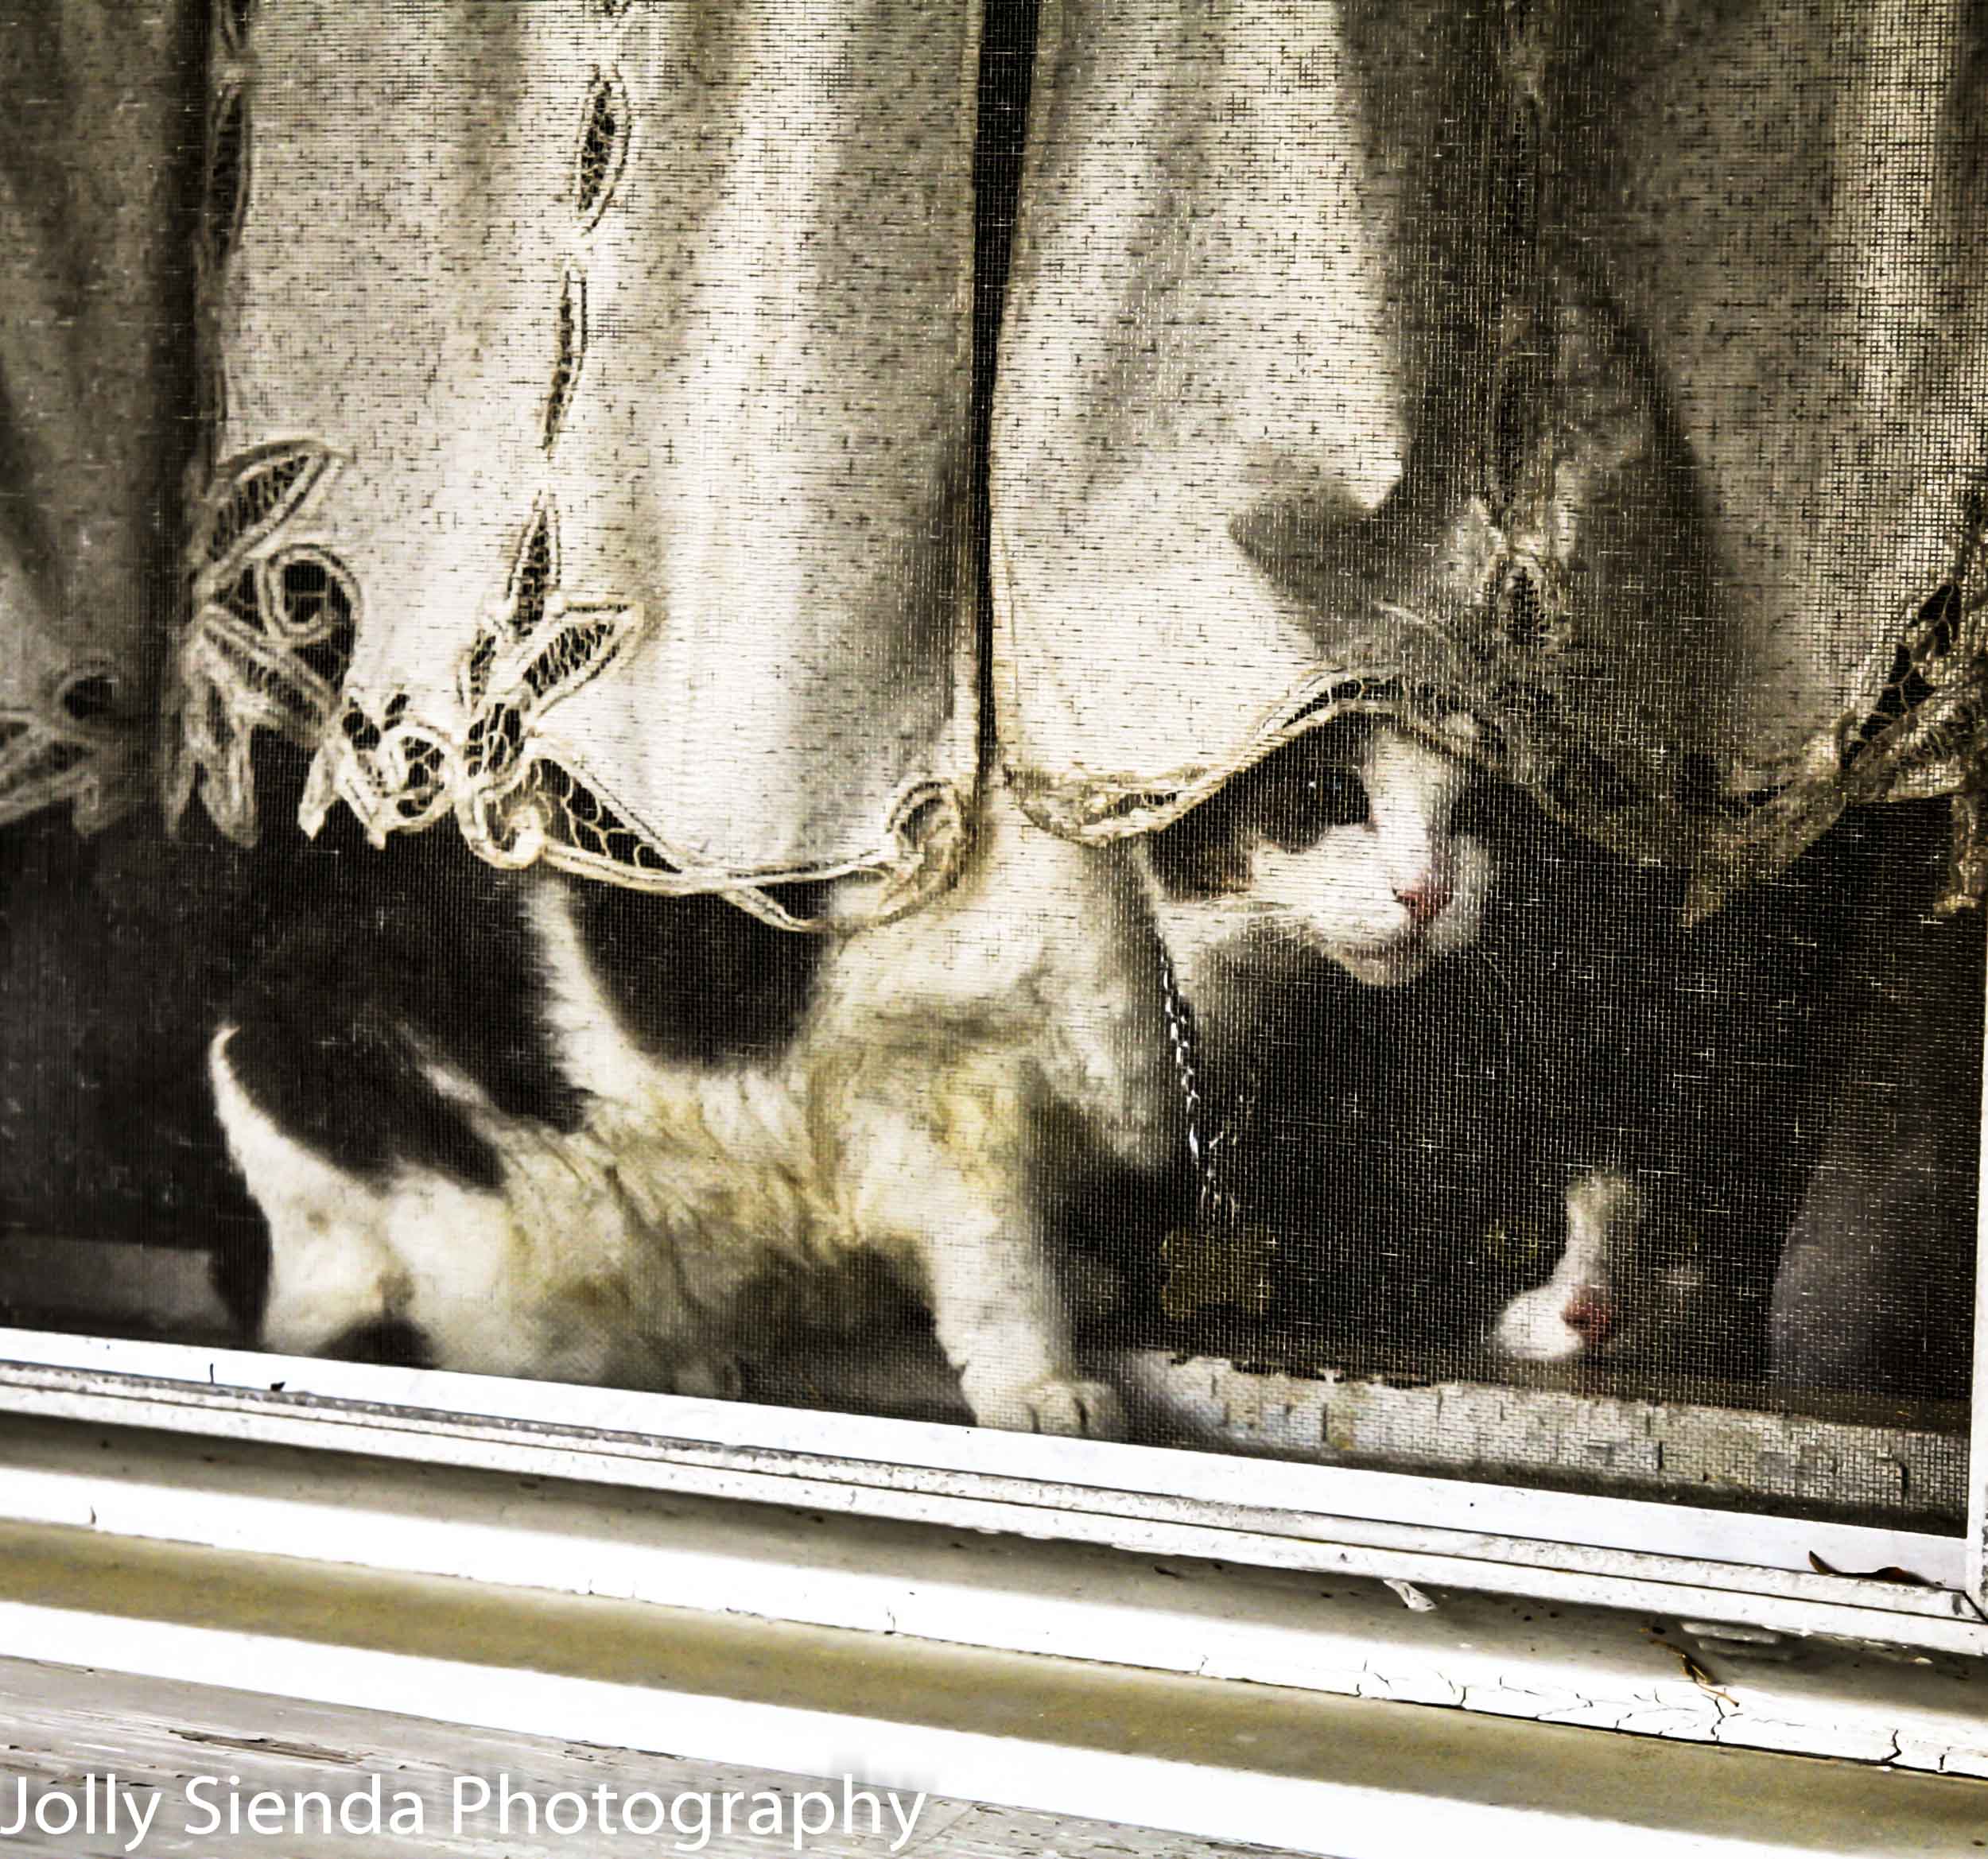 Cats peak through a screened in window with lace curtains